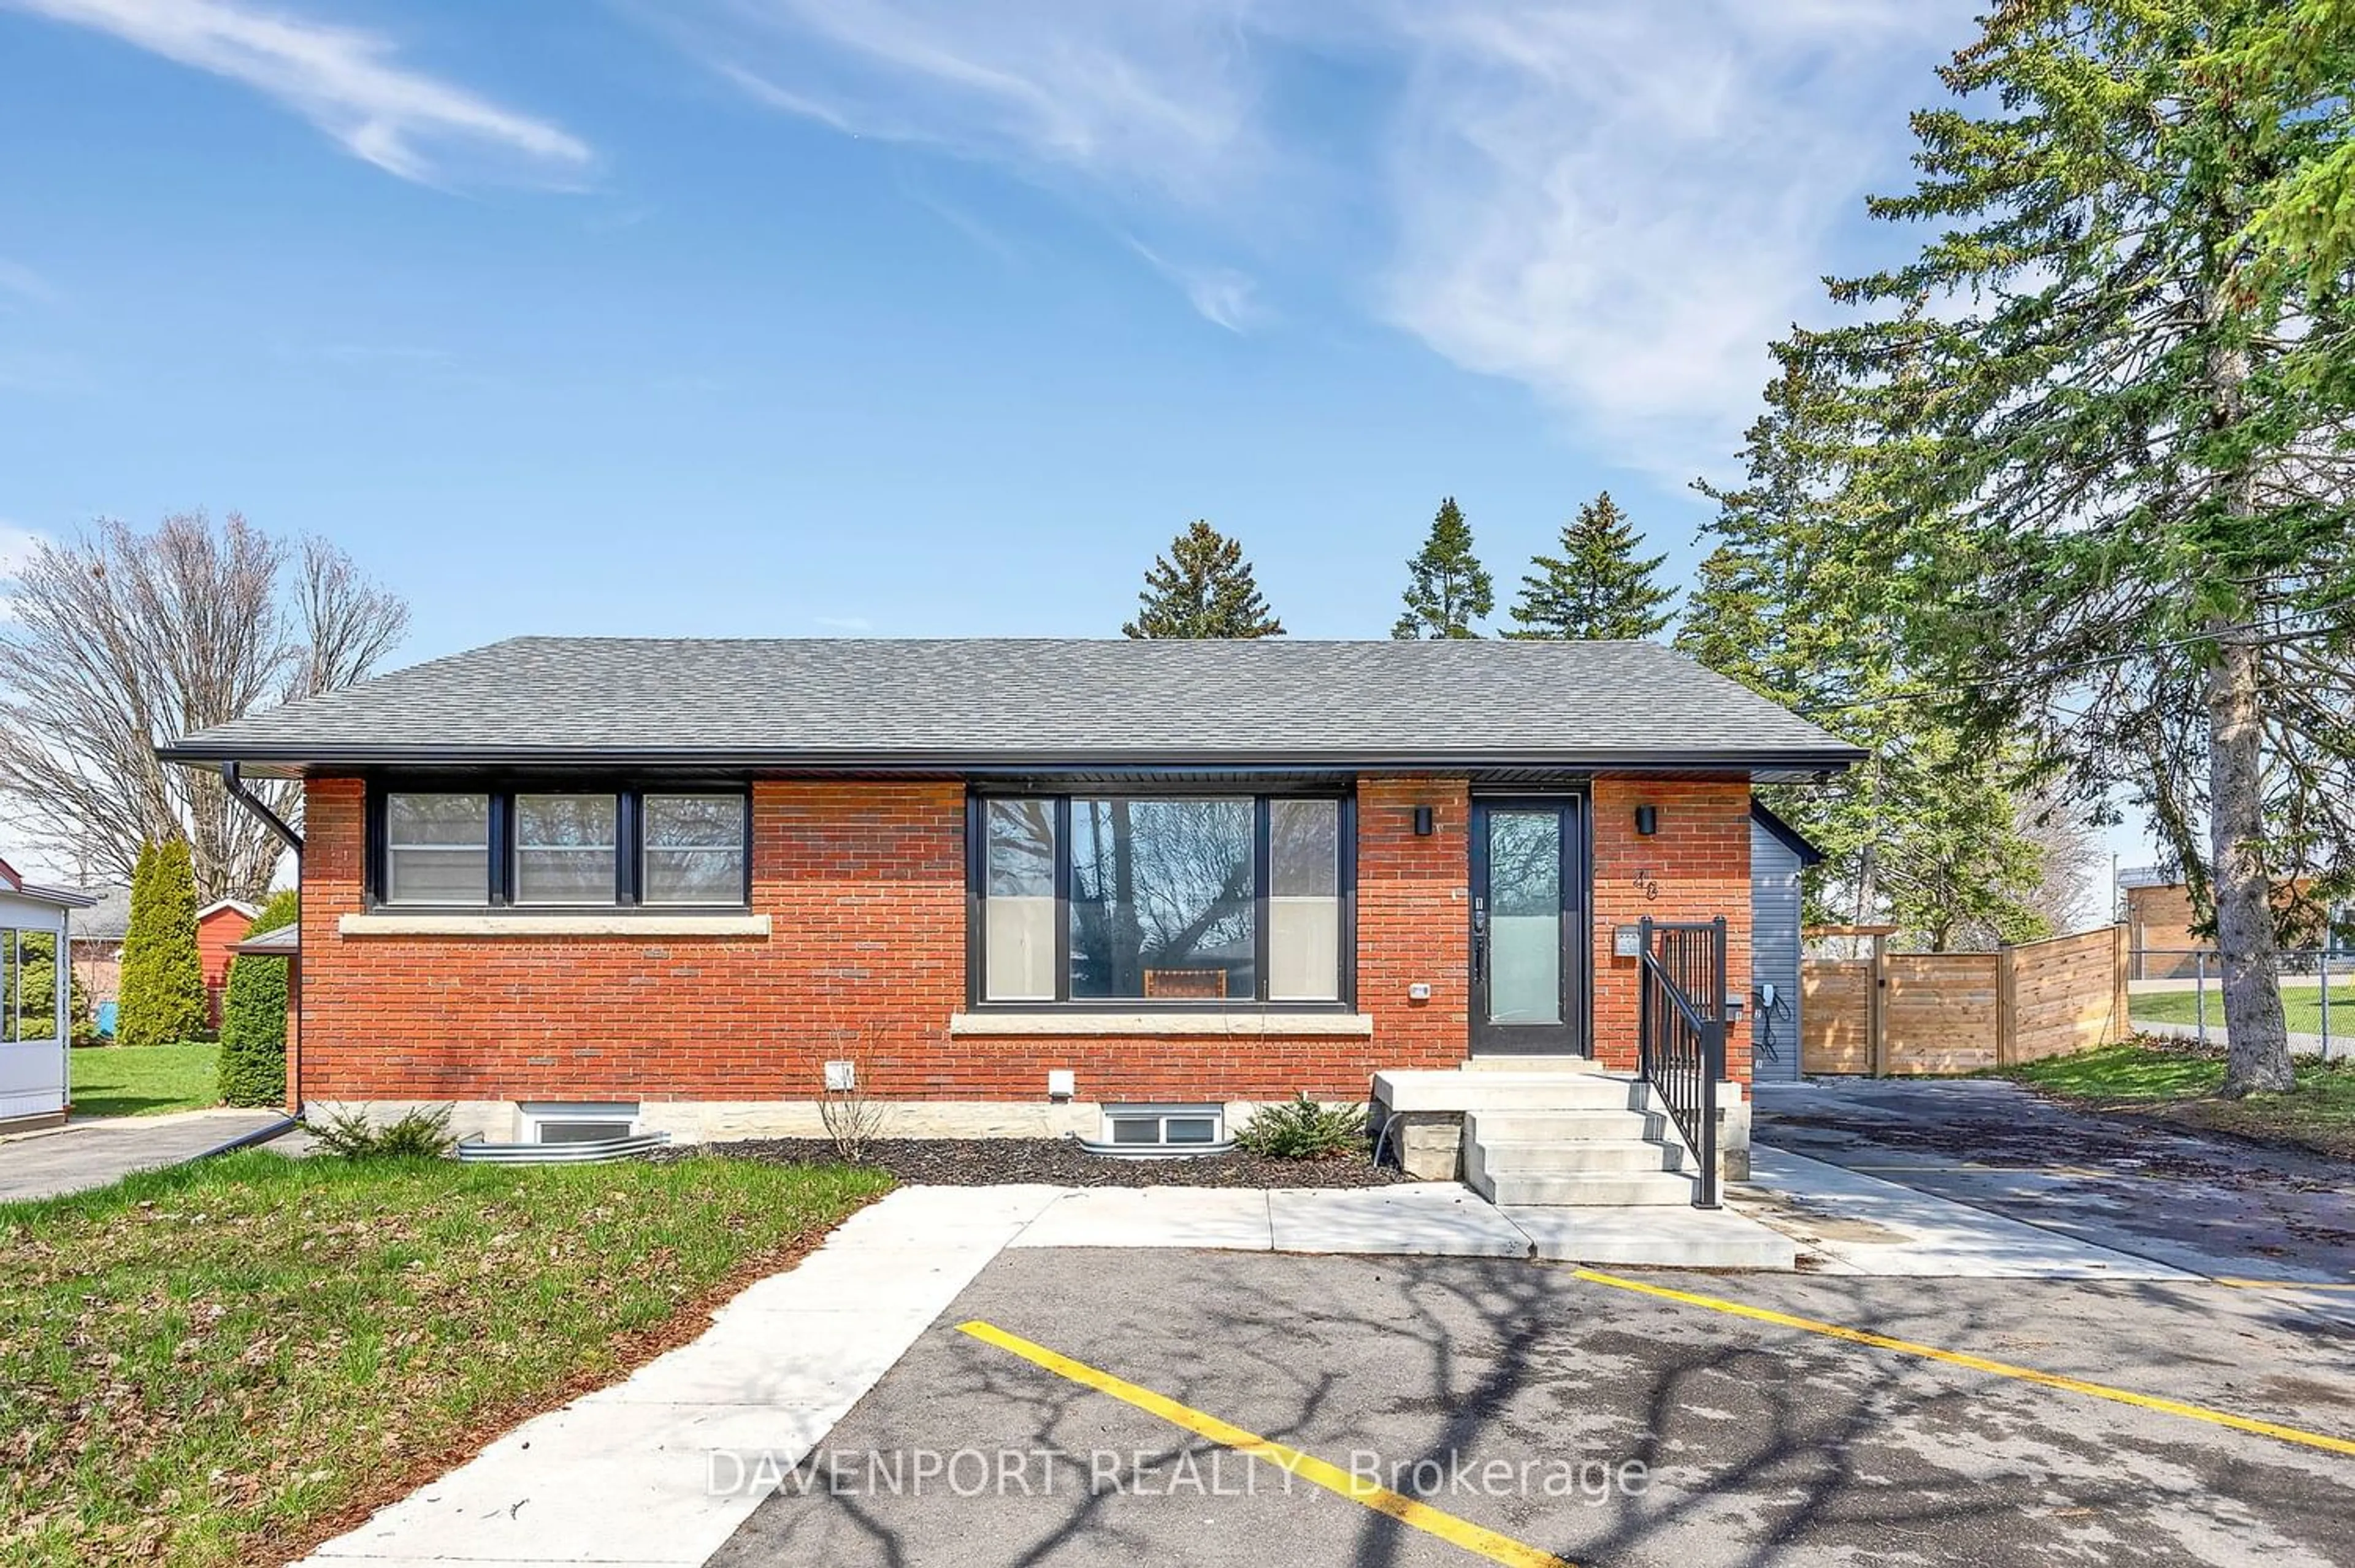 Home with brick exterior material for 48 Harber Ave, Kitchener Ontario N2C 1Y8